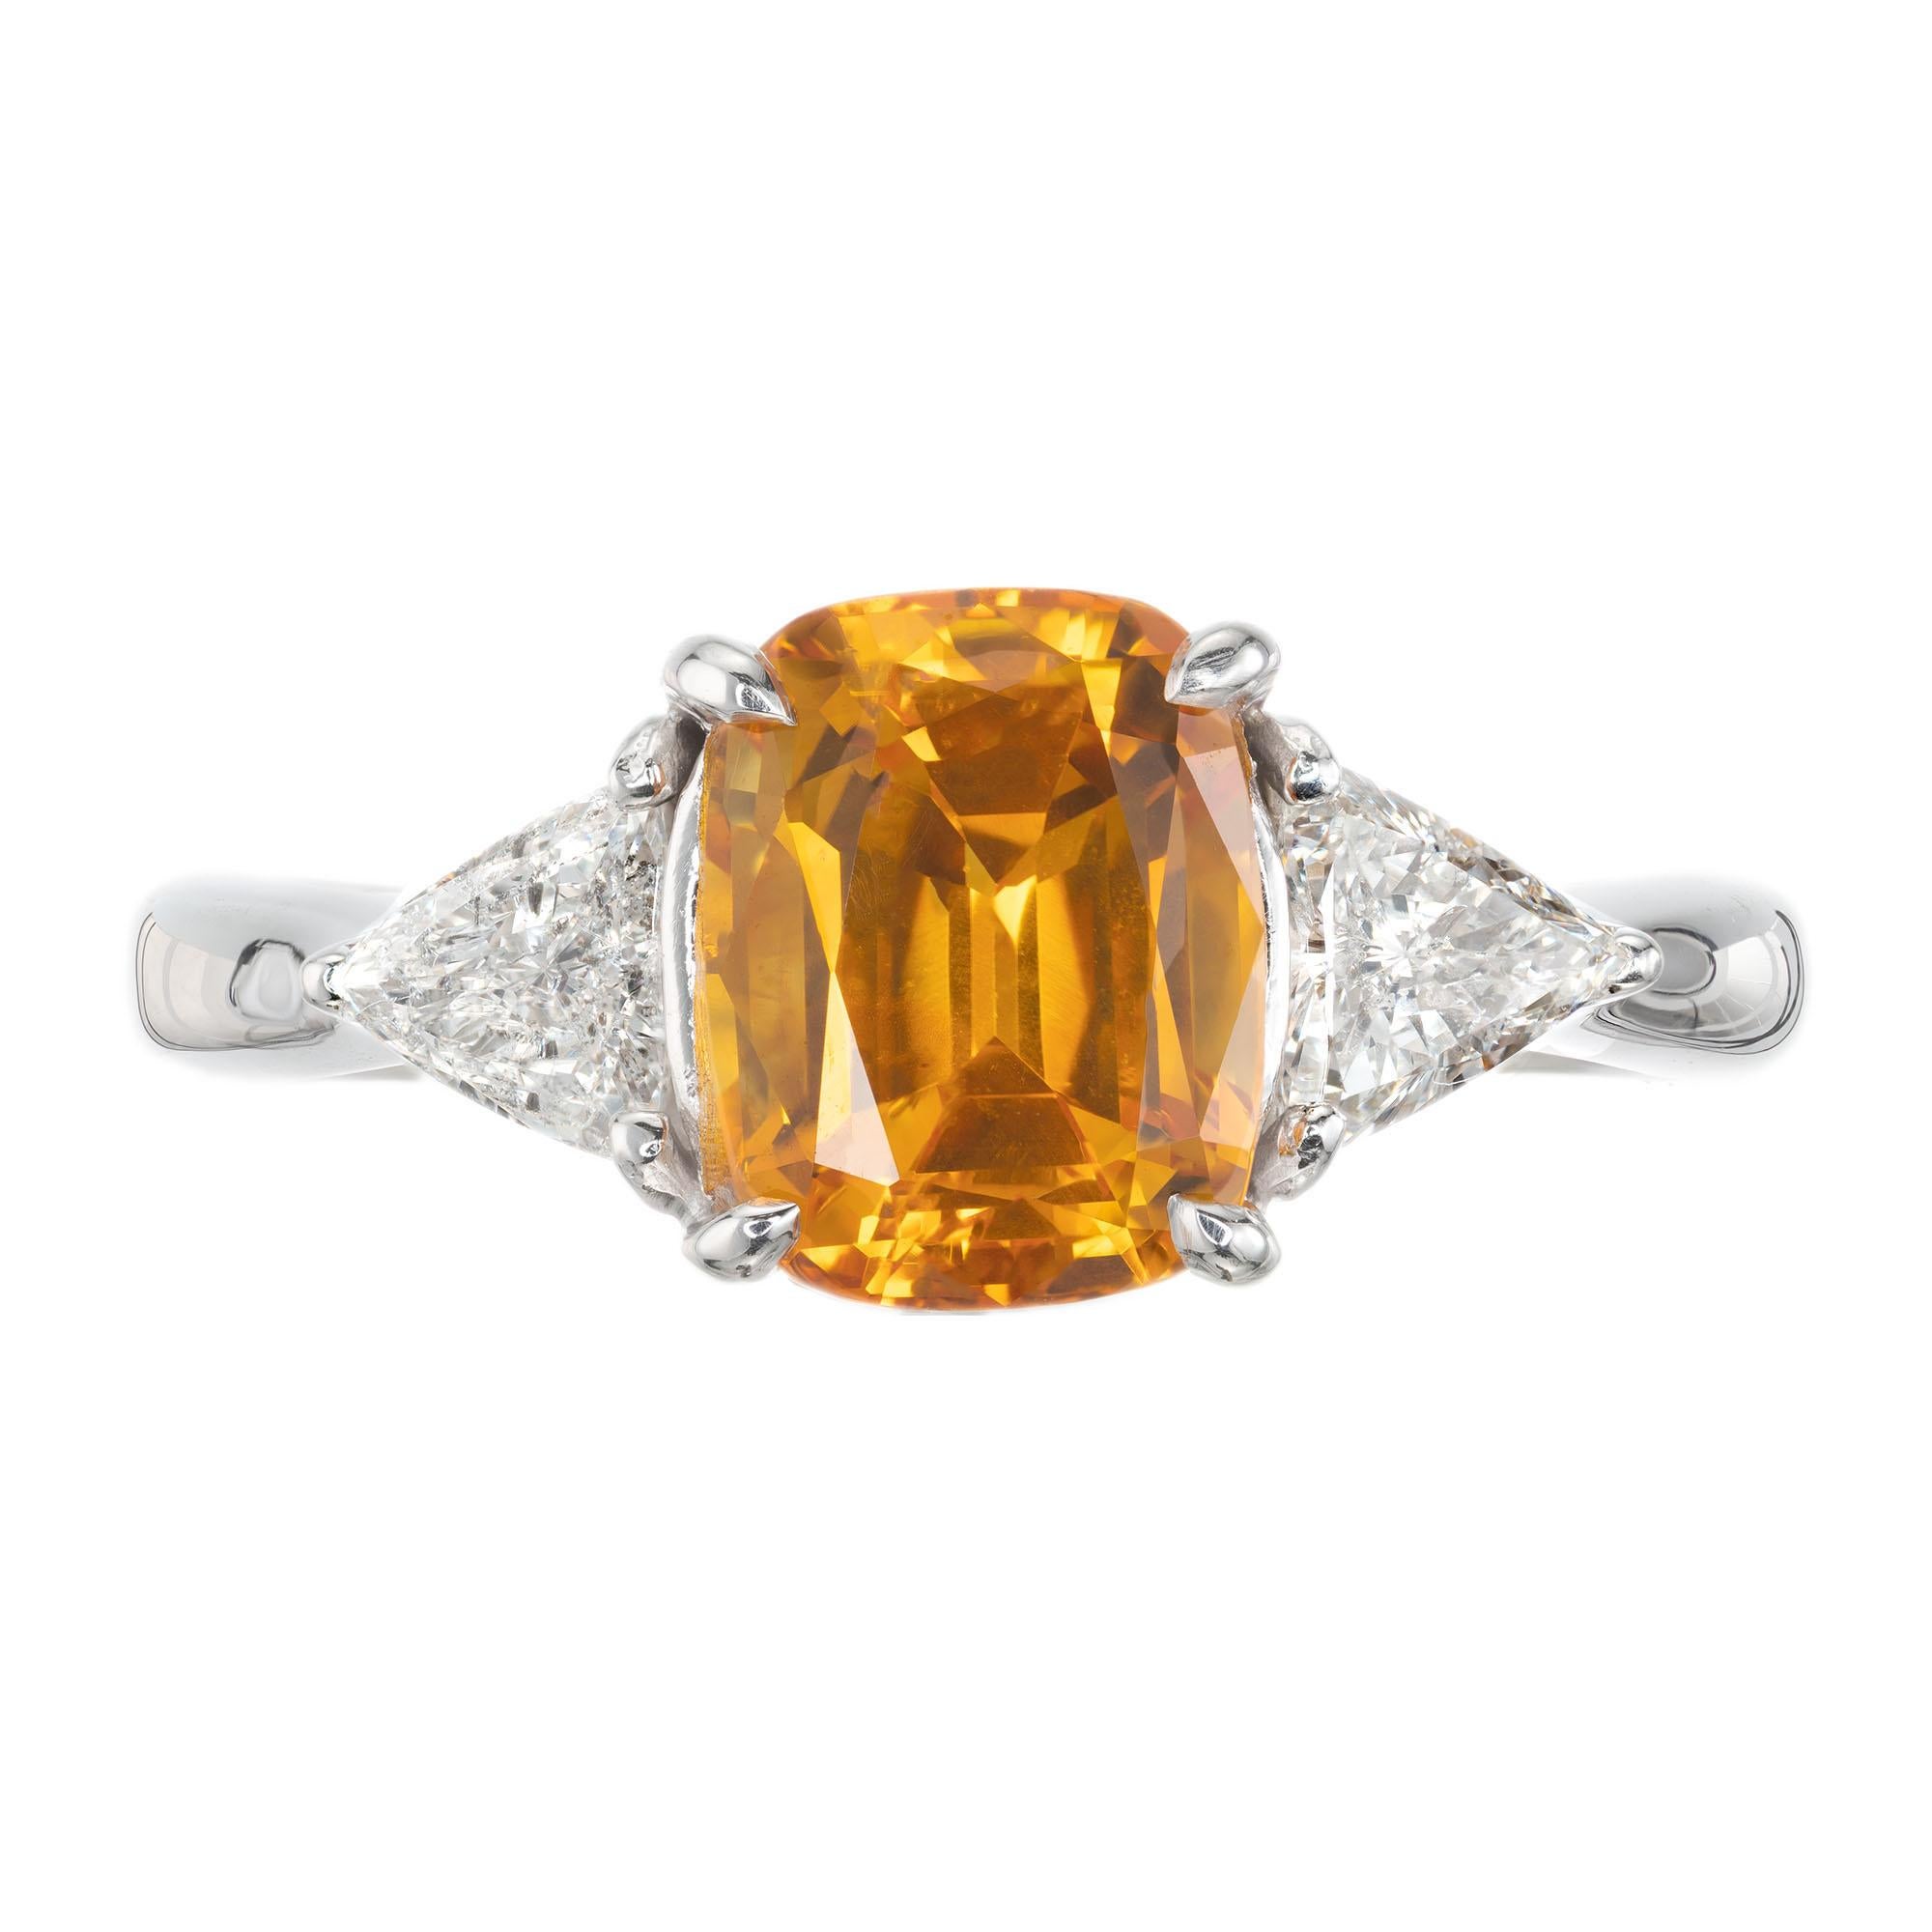 GIA certified yellowish orange sapphire and diamond ring. GIA certified natural cushion cut center sapphire simple heat only in a classic three-stone 14k white gold setting with two triangle shape accent diamonds. 

1 cushion cut yellowish orange